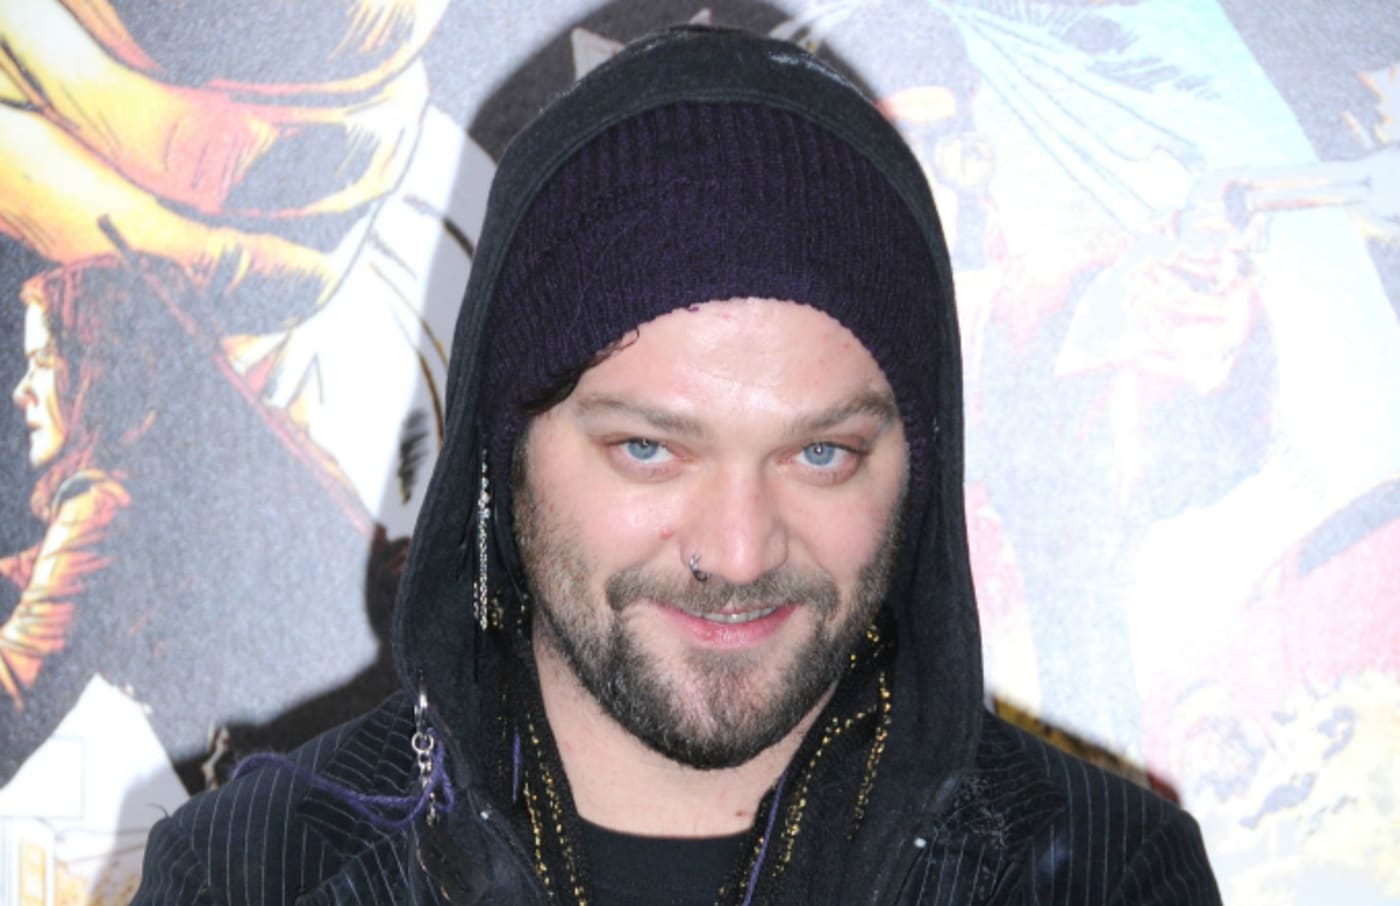 TV personality Bam Margera